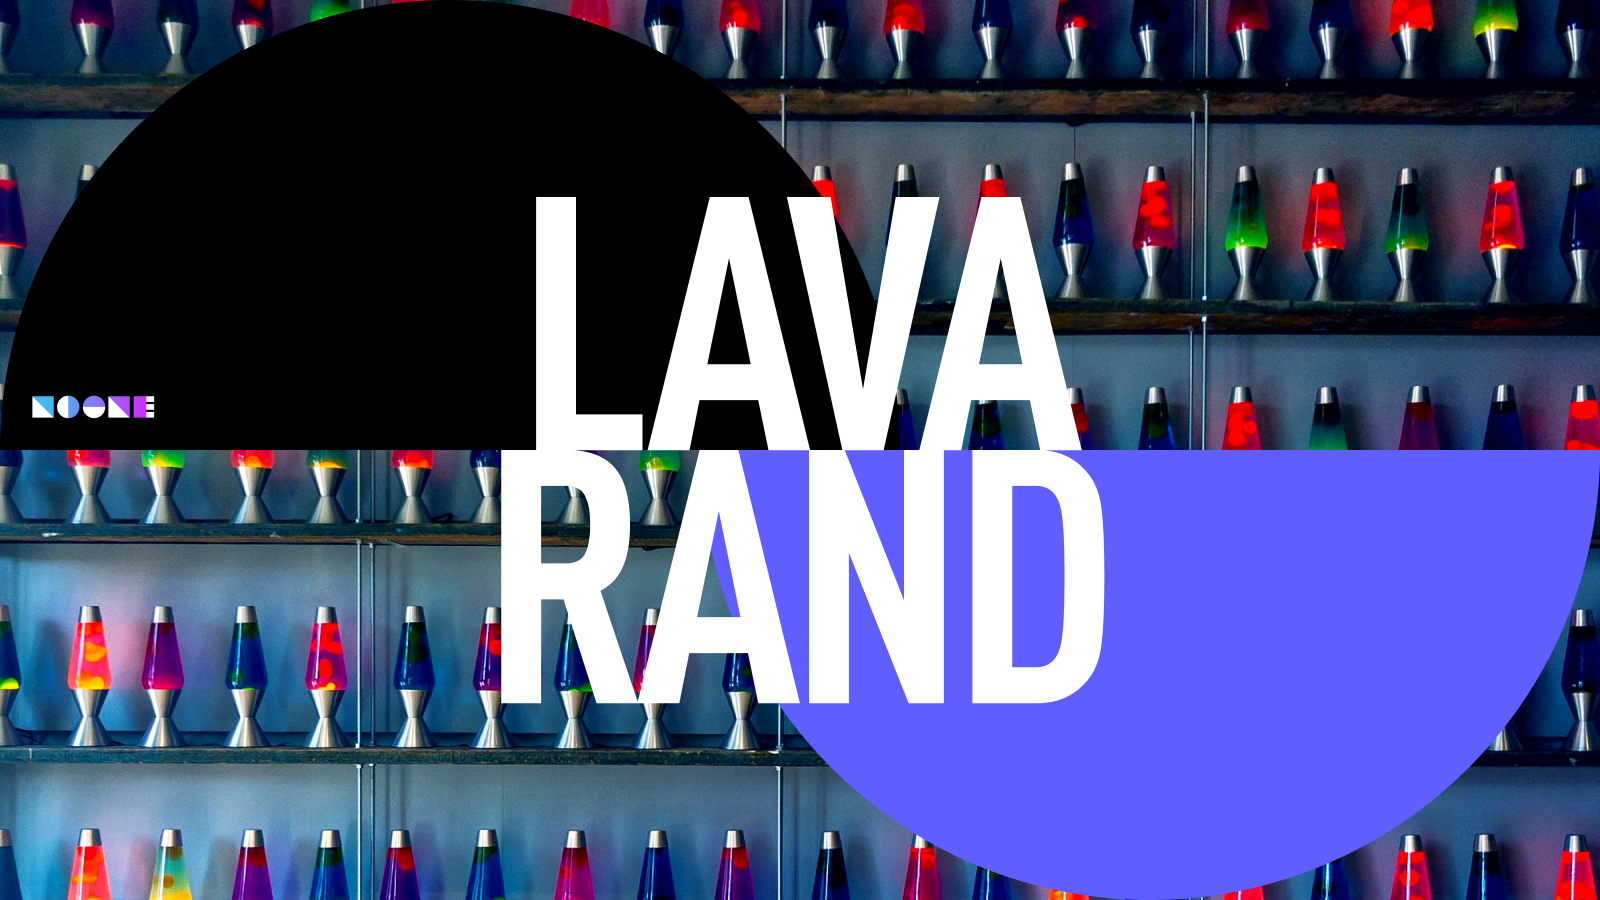 Photo of the Cloudflare's lava lamp stand used in the LavaRand setup.